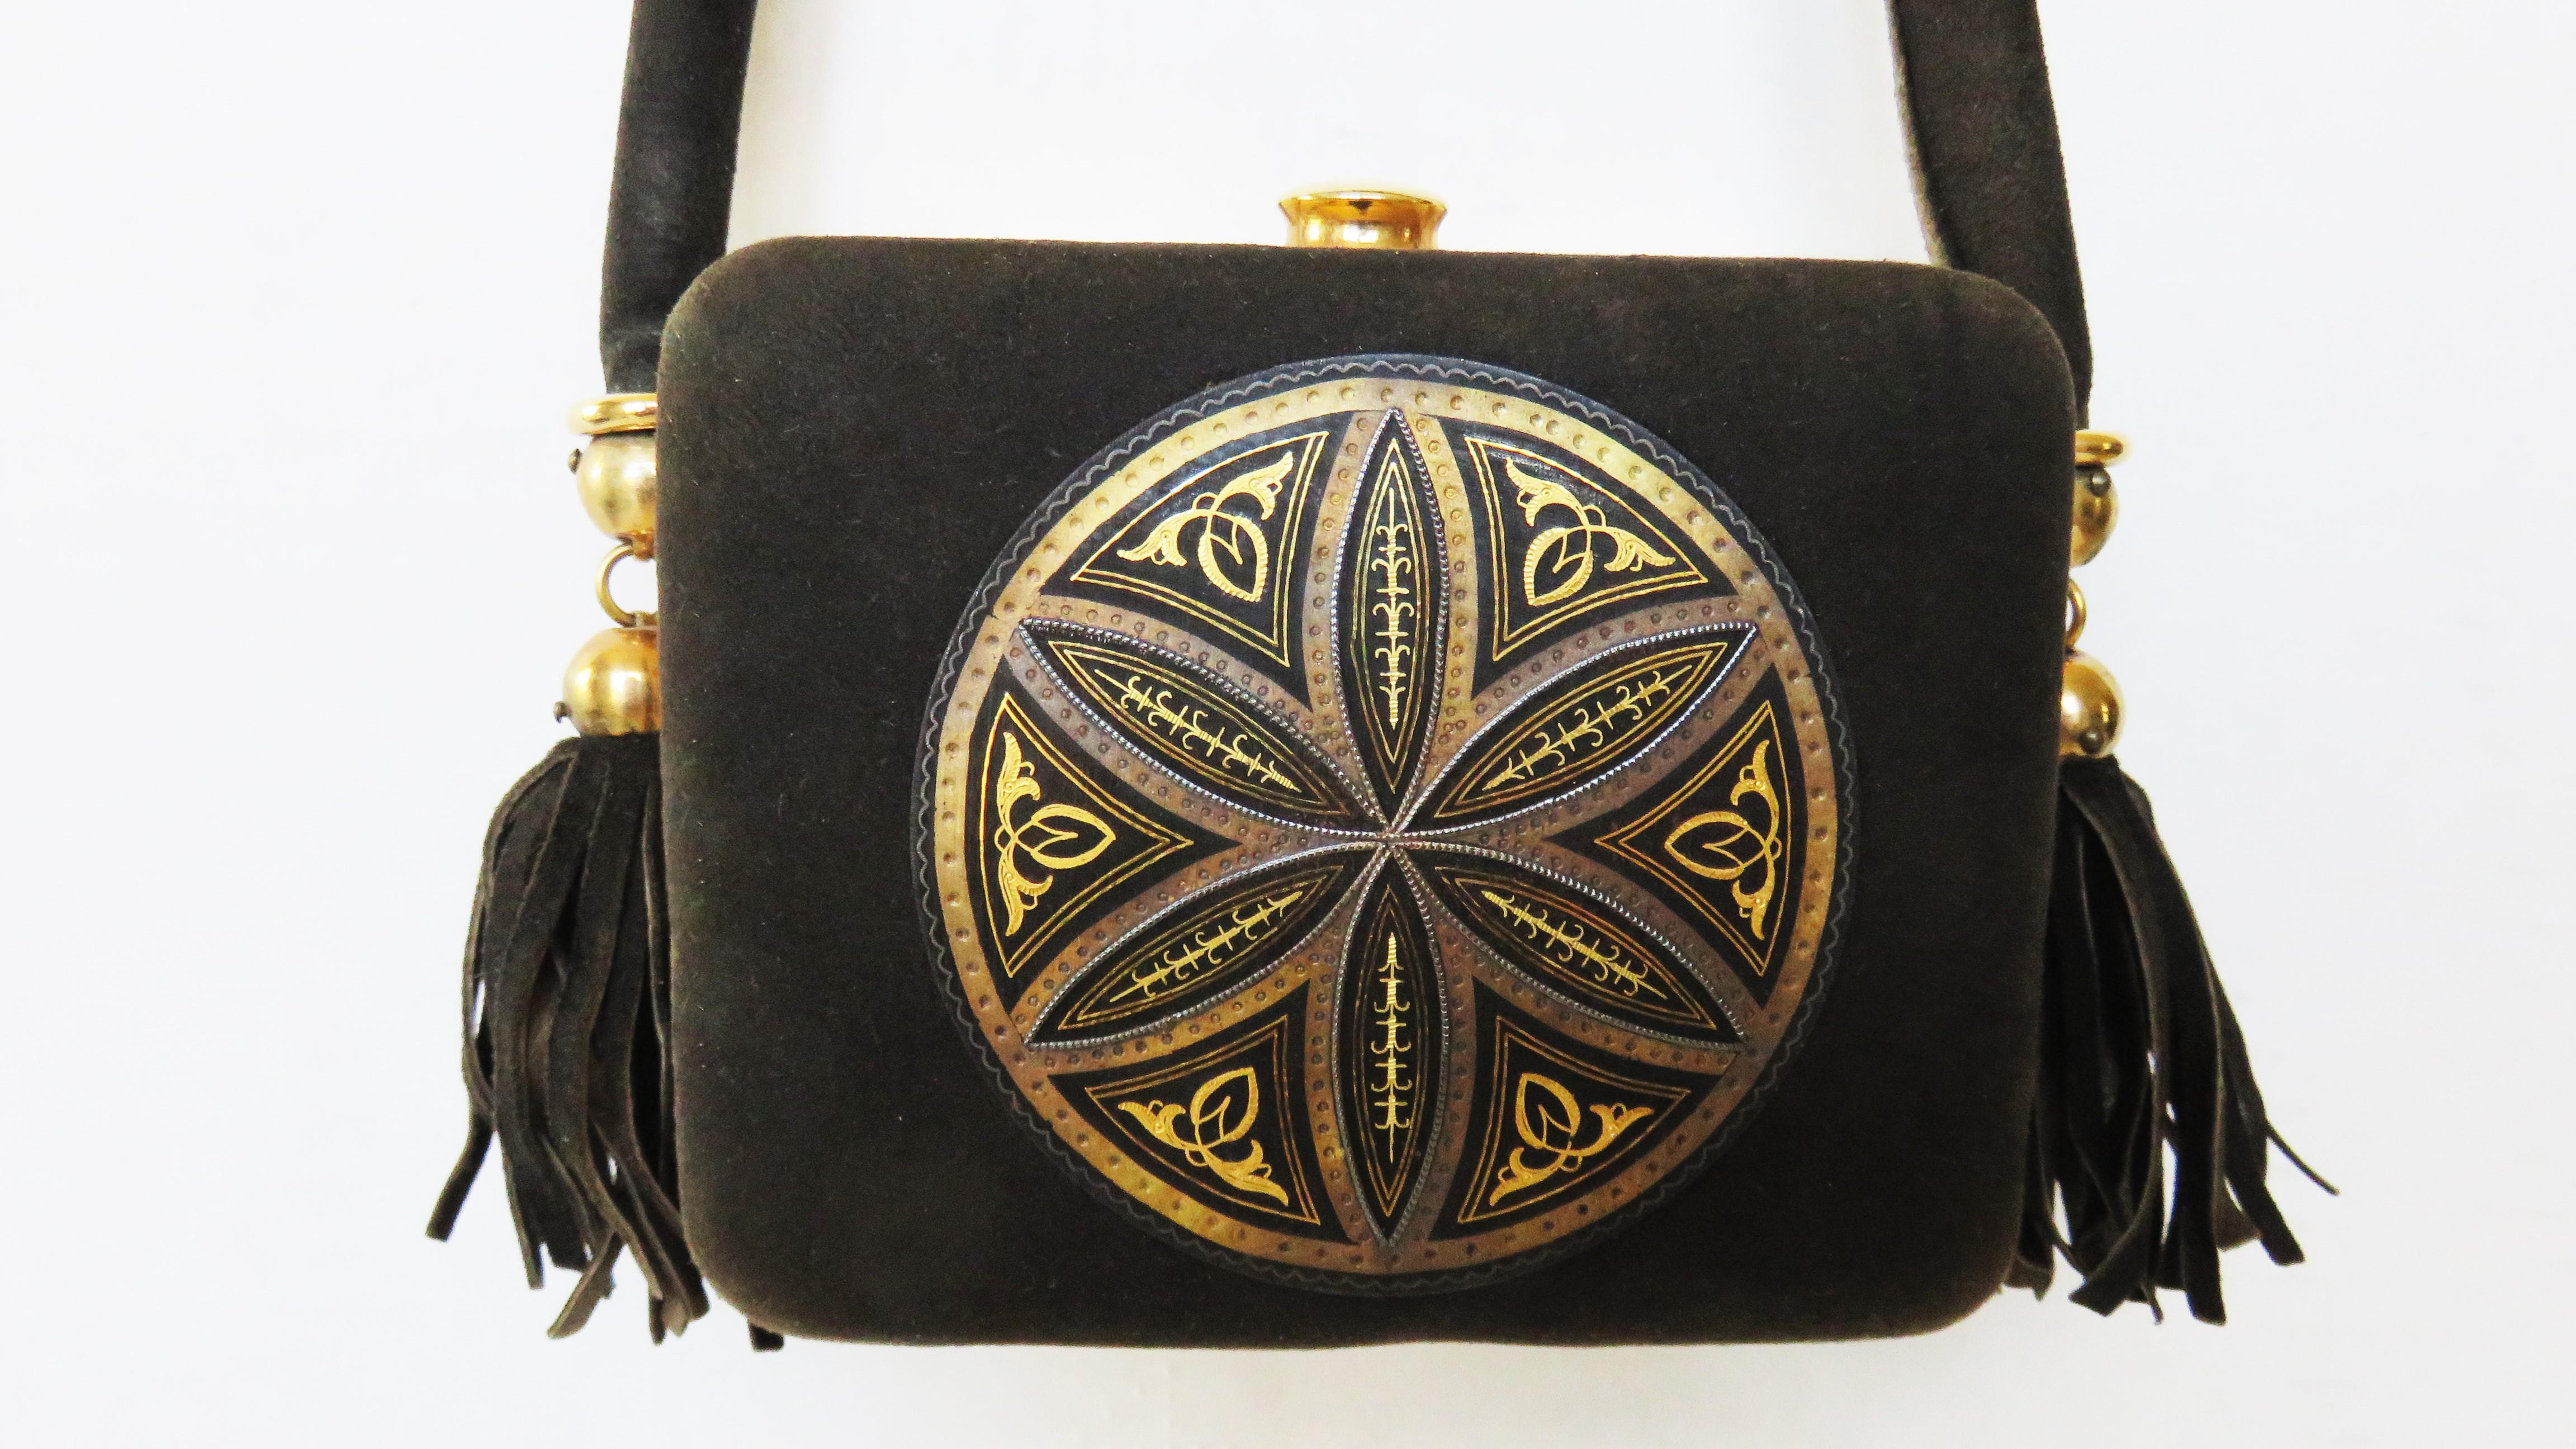  1950s Suede Minaudiere Compact Evening Bag with Medallion Front In Good Condition For Sale In Water Mill, NY